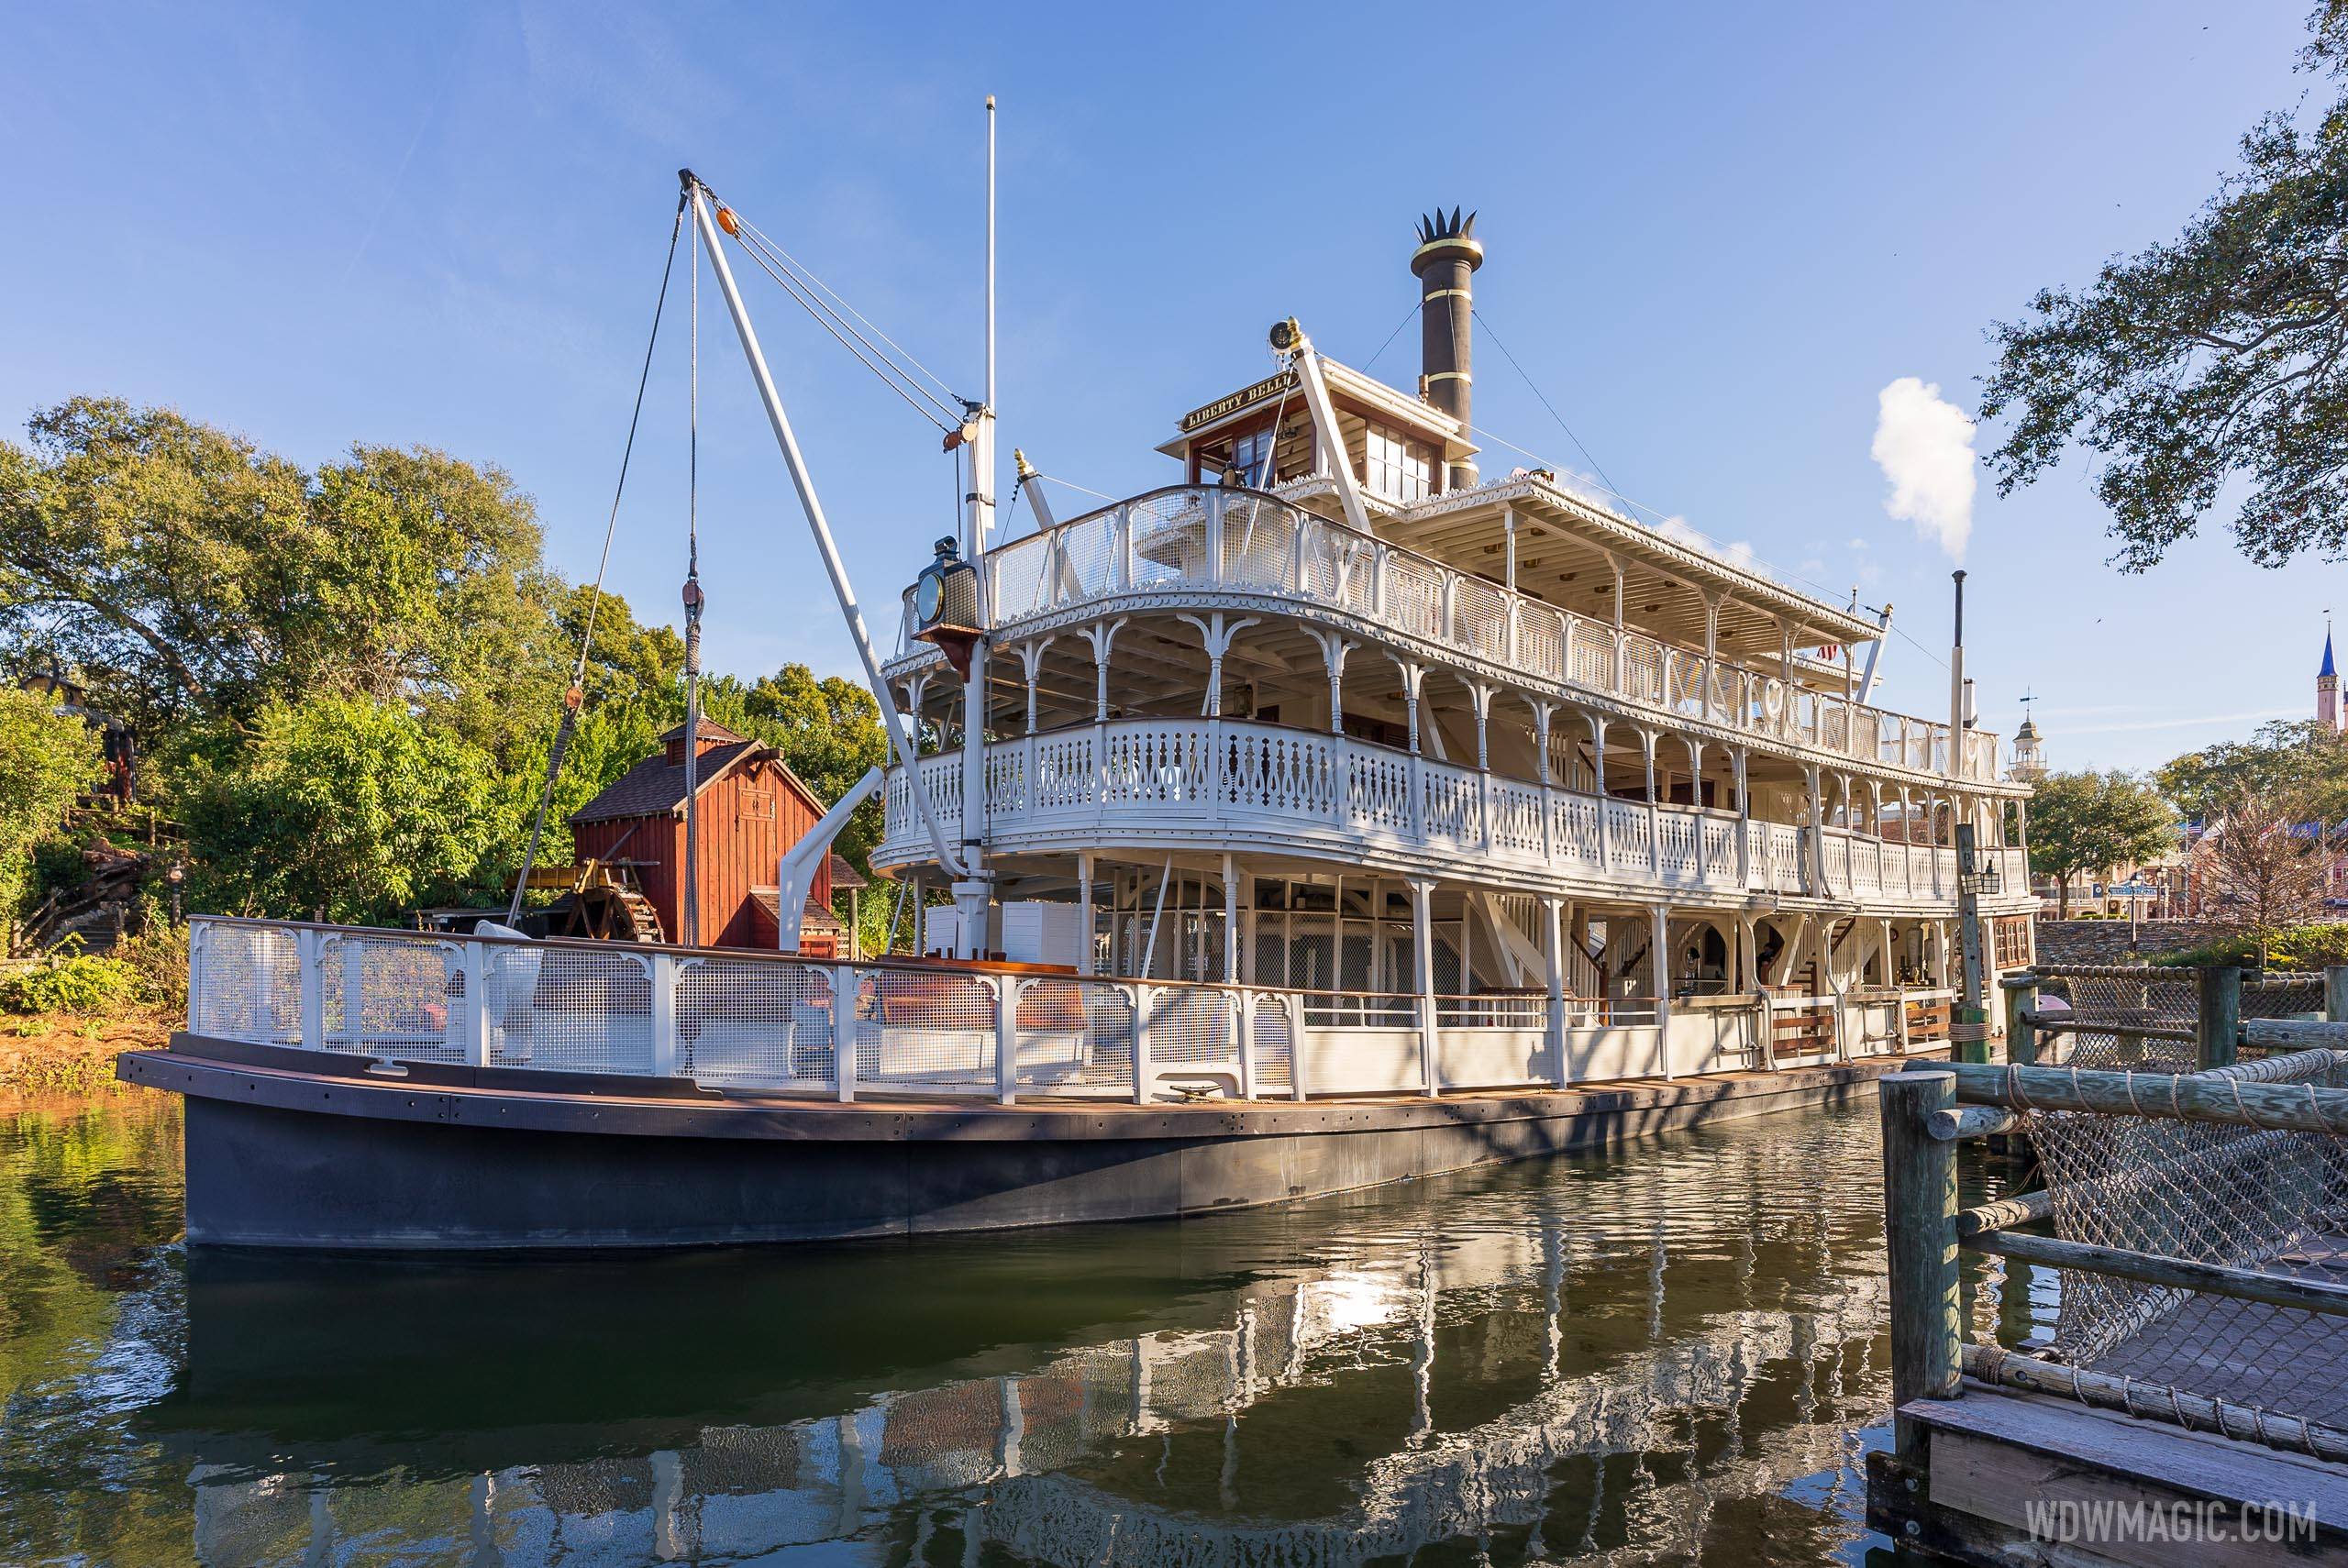 Liberty Square Riverboat closing for refurbishment in early 2011